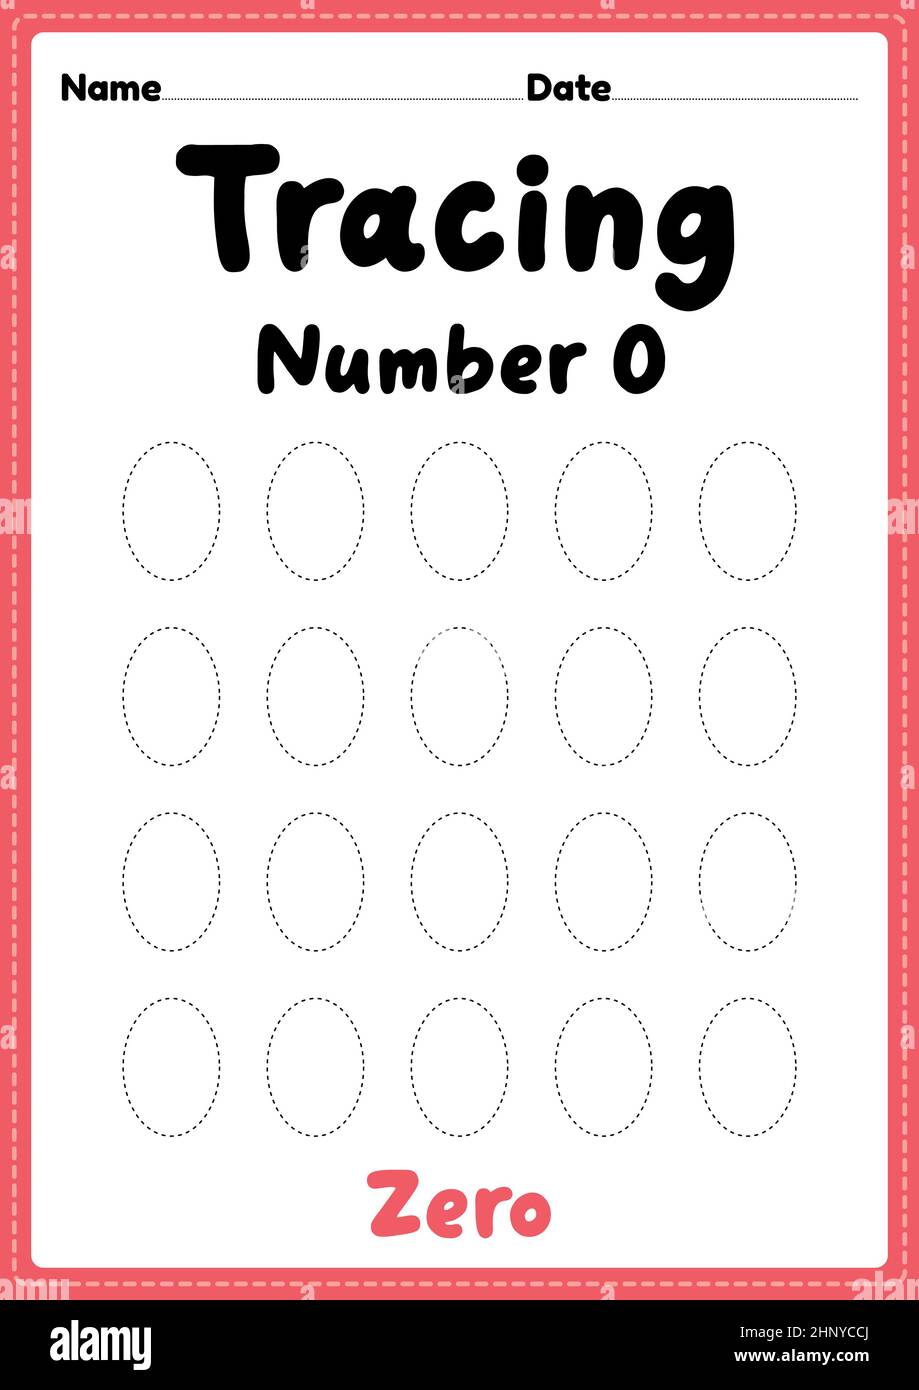 Tracing number 0 worksheet for kindergarten, preschool and Montessori kids for learning numbers and handwriting practice activities. Stock Photo